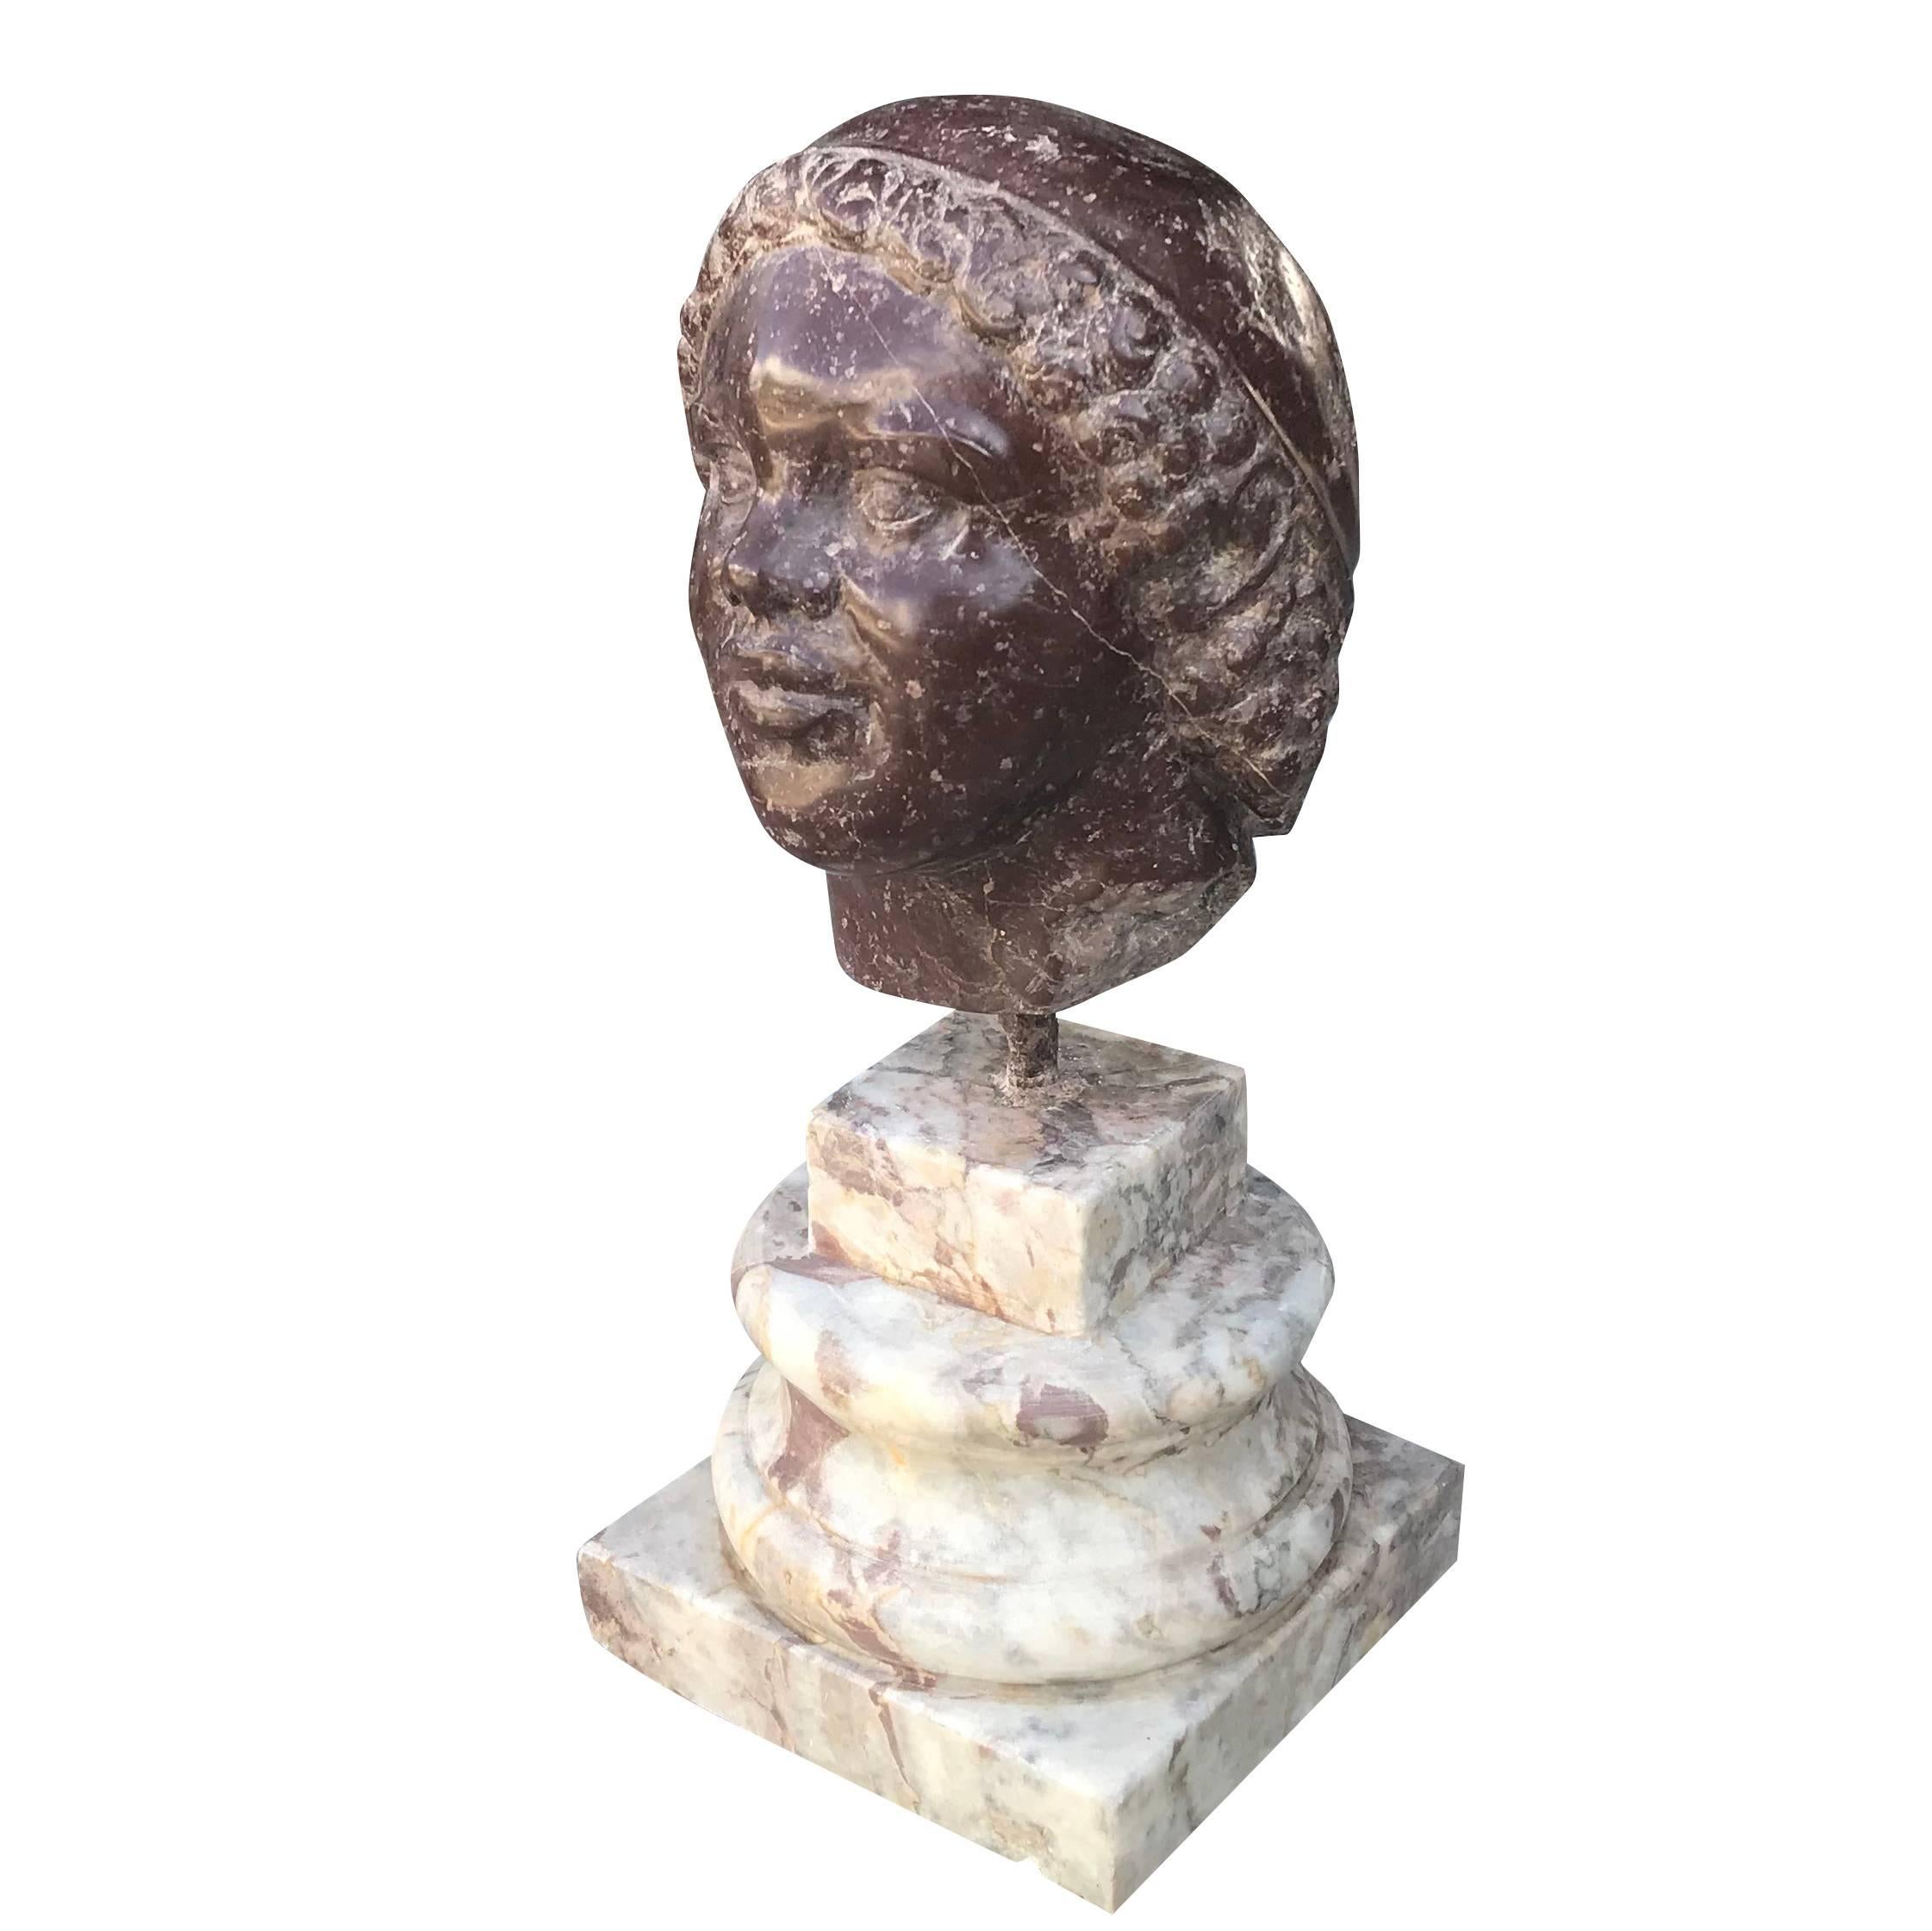 An antique Italian head sculptured in Porphyry sitting on a Carrara marble column with a square step base in the style of Benvenuto Cellini, in good condition. The Italian décor represents the Renaissance time period. Wear consistent with age and